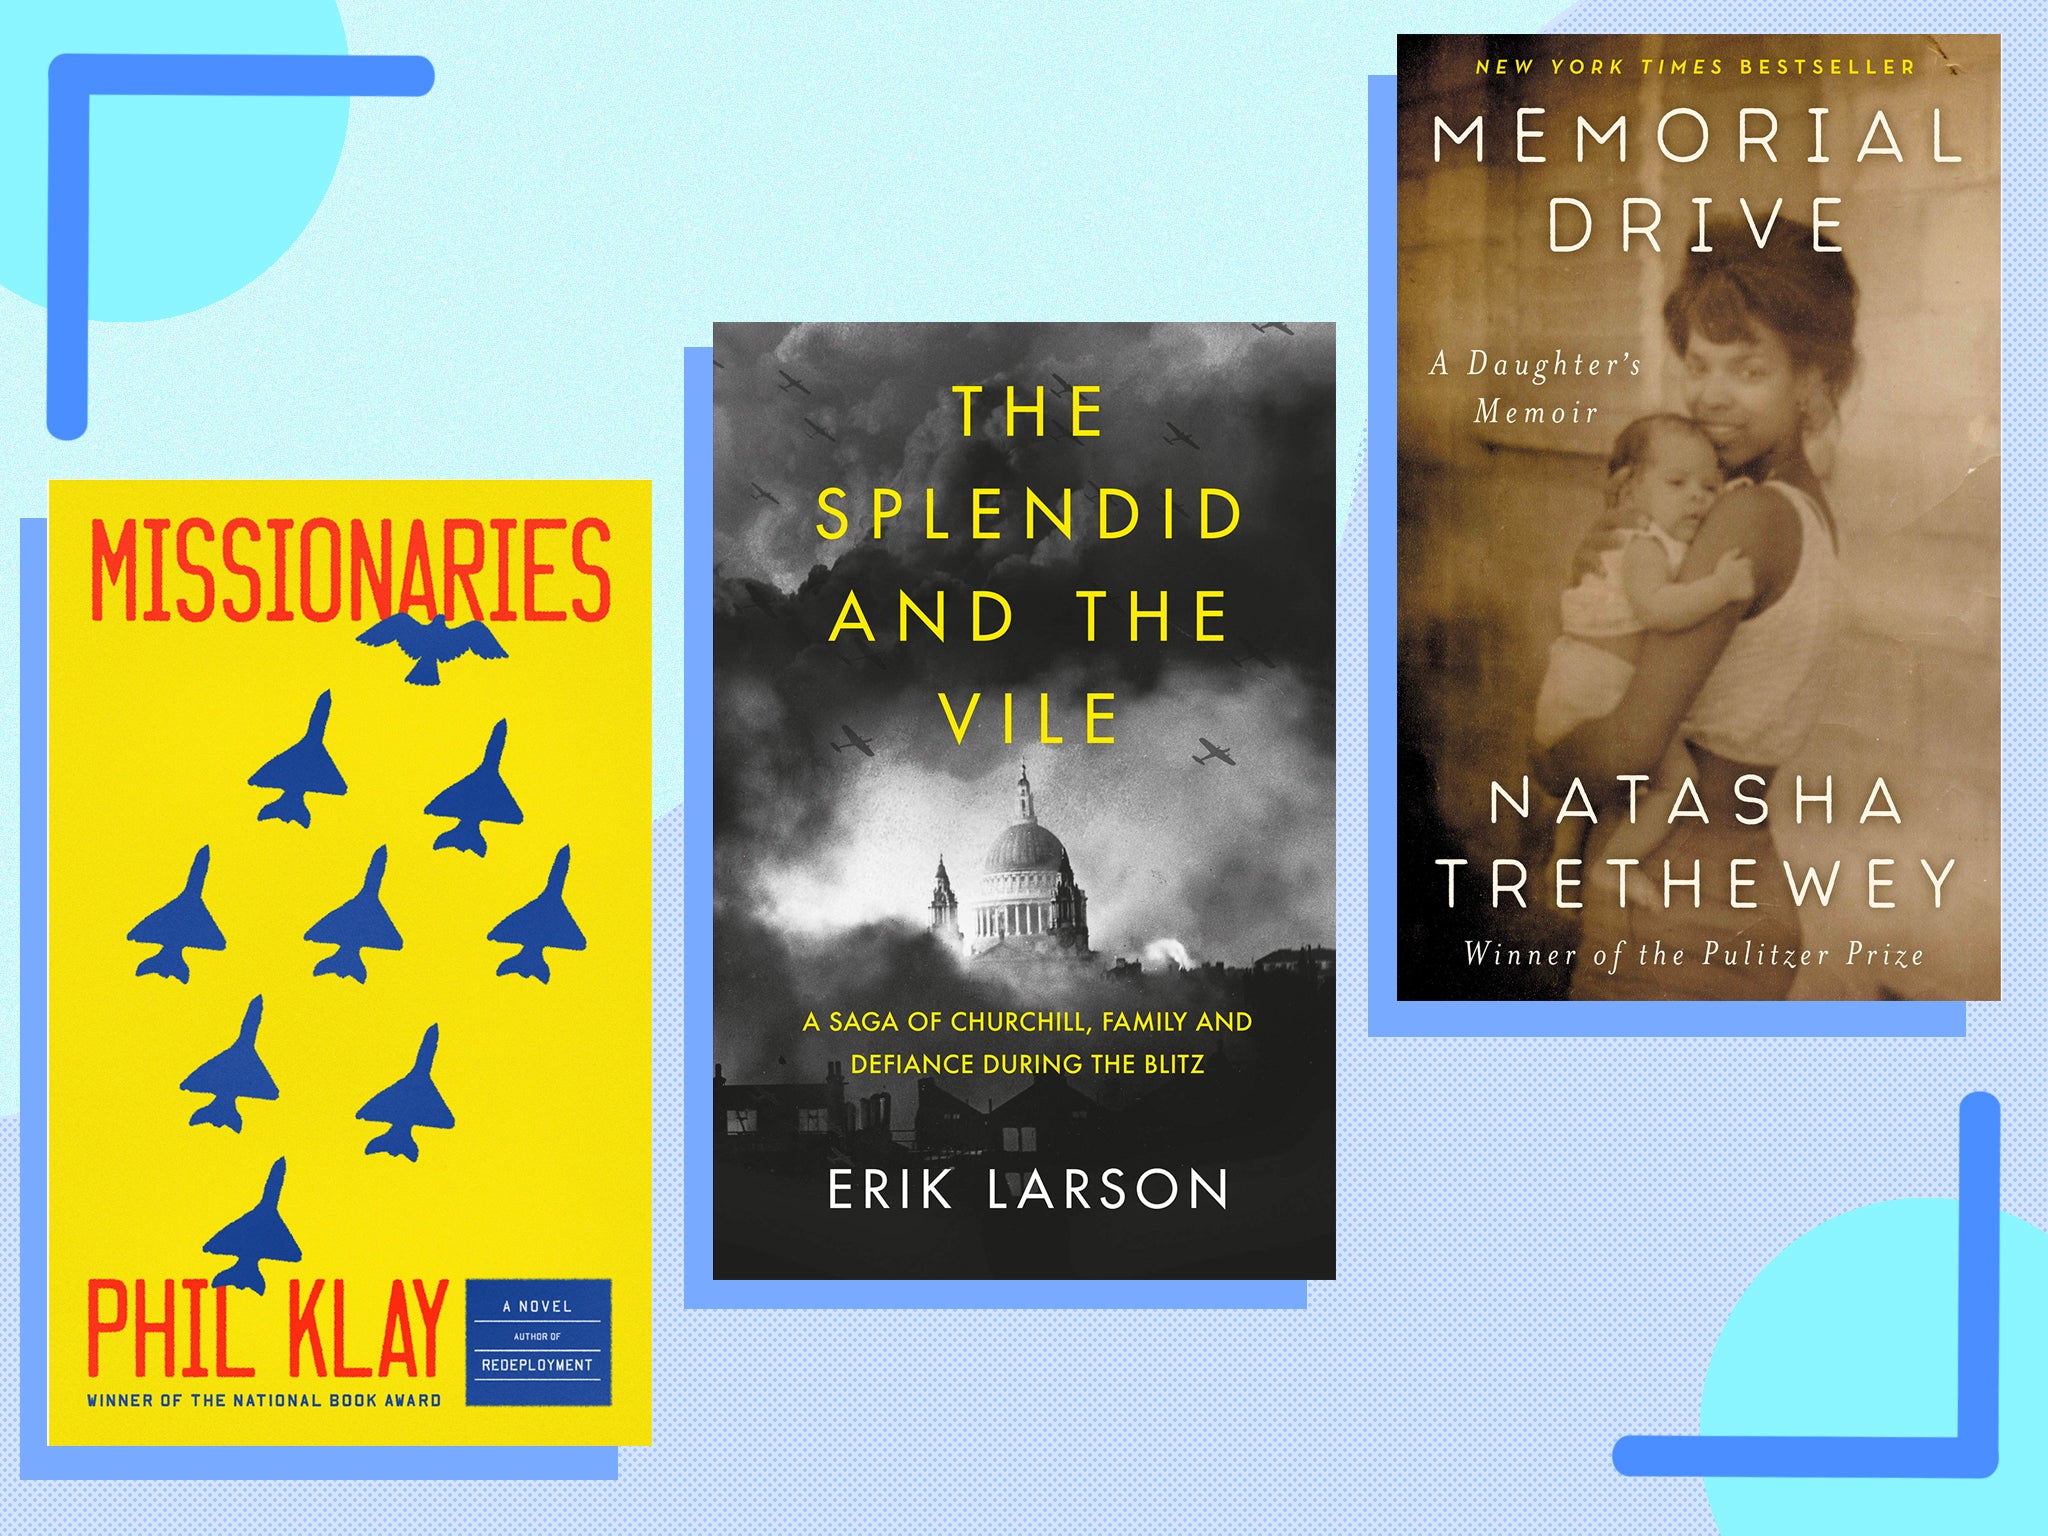 This curated round-up is an eclectic mix of fiction, non-fiction and memoirs&nbsp;